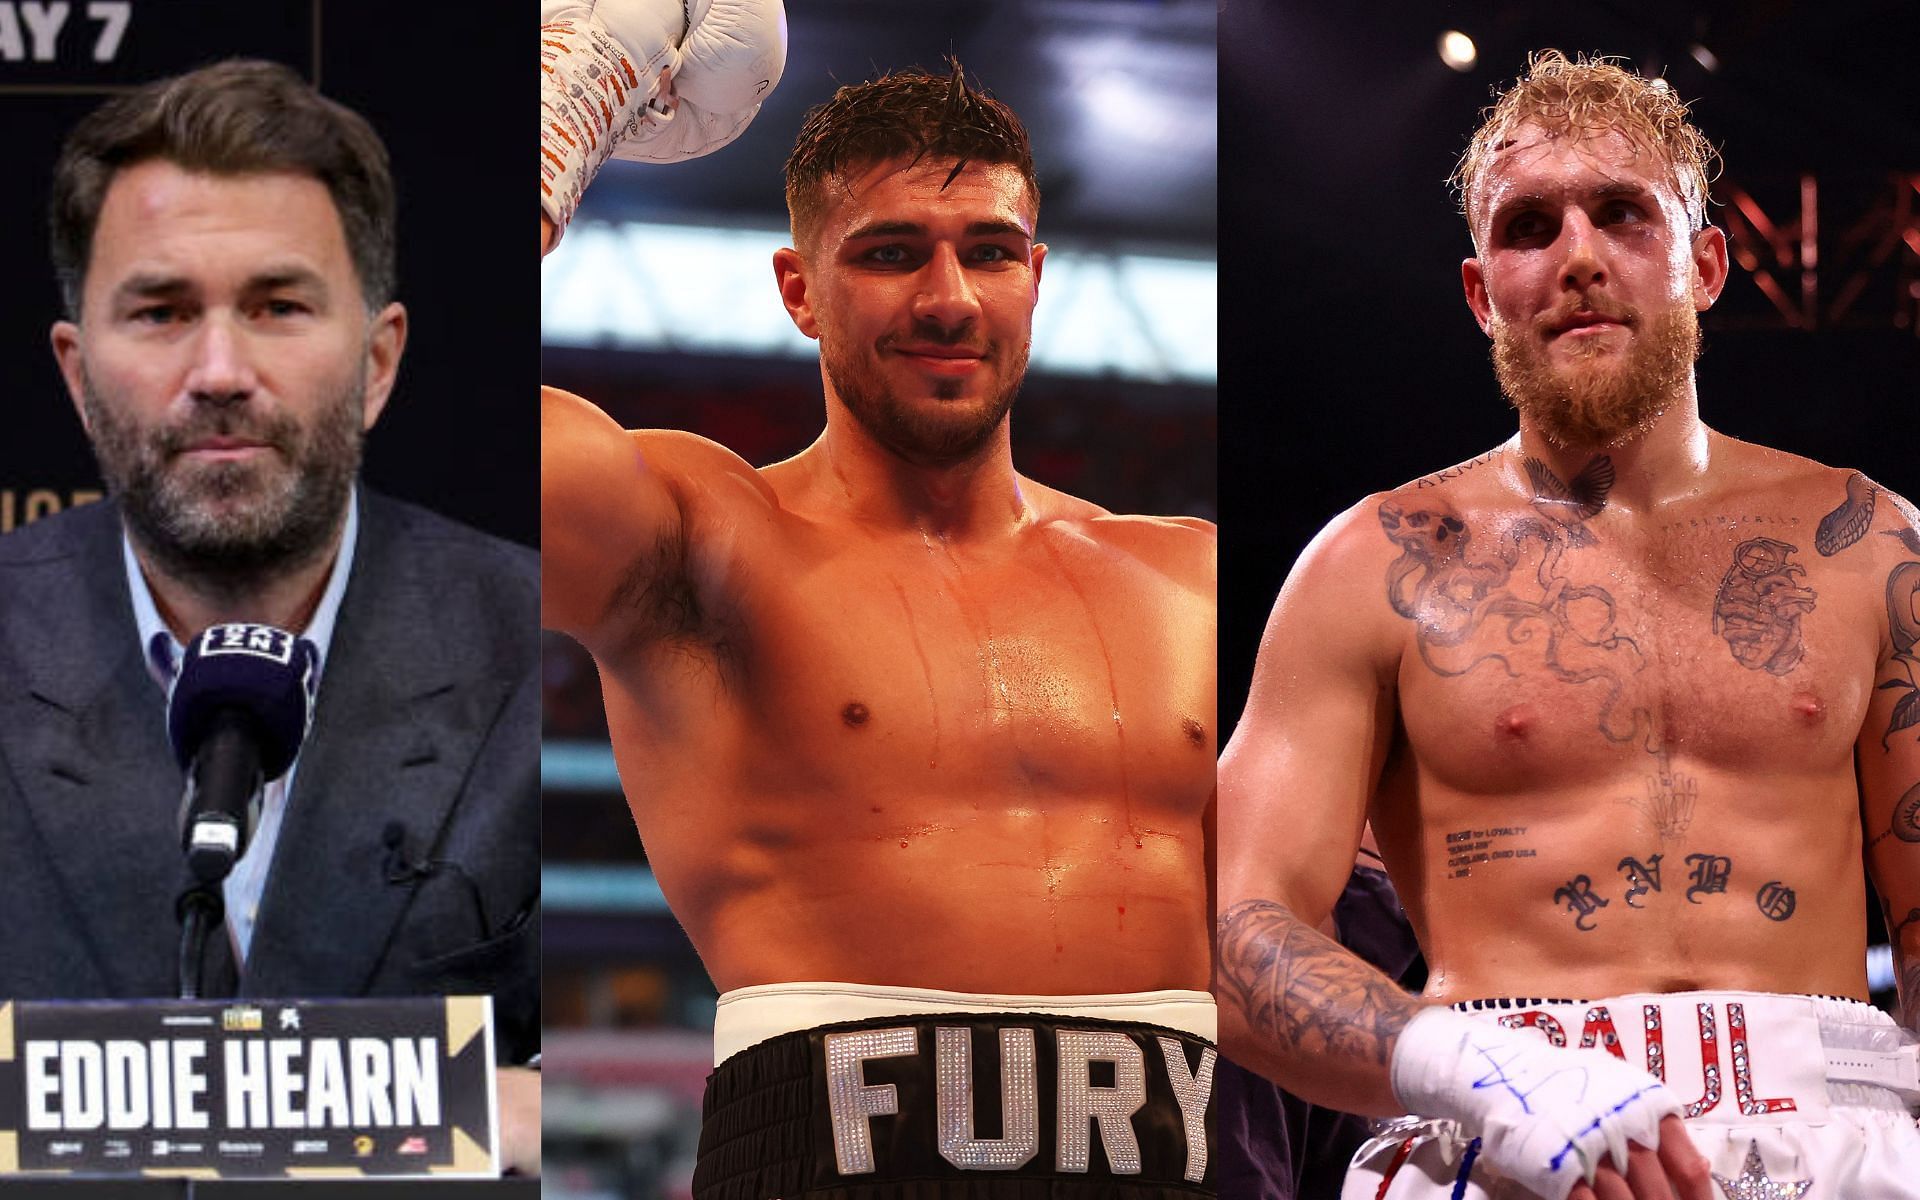 Eddie Hearn (left), Tommy Fury (center), and Jake Paul (right)